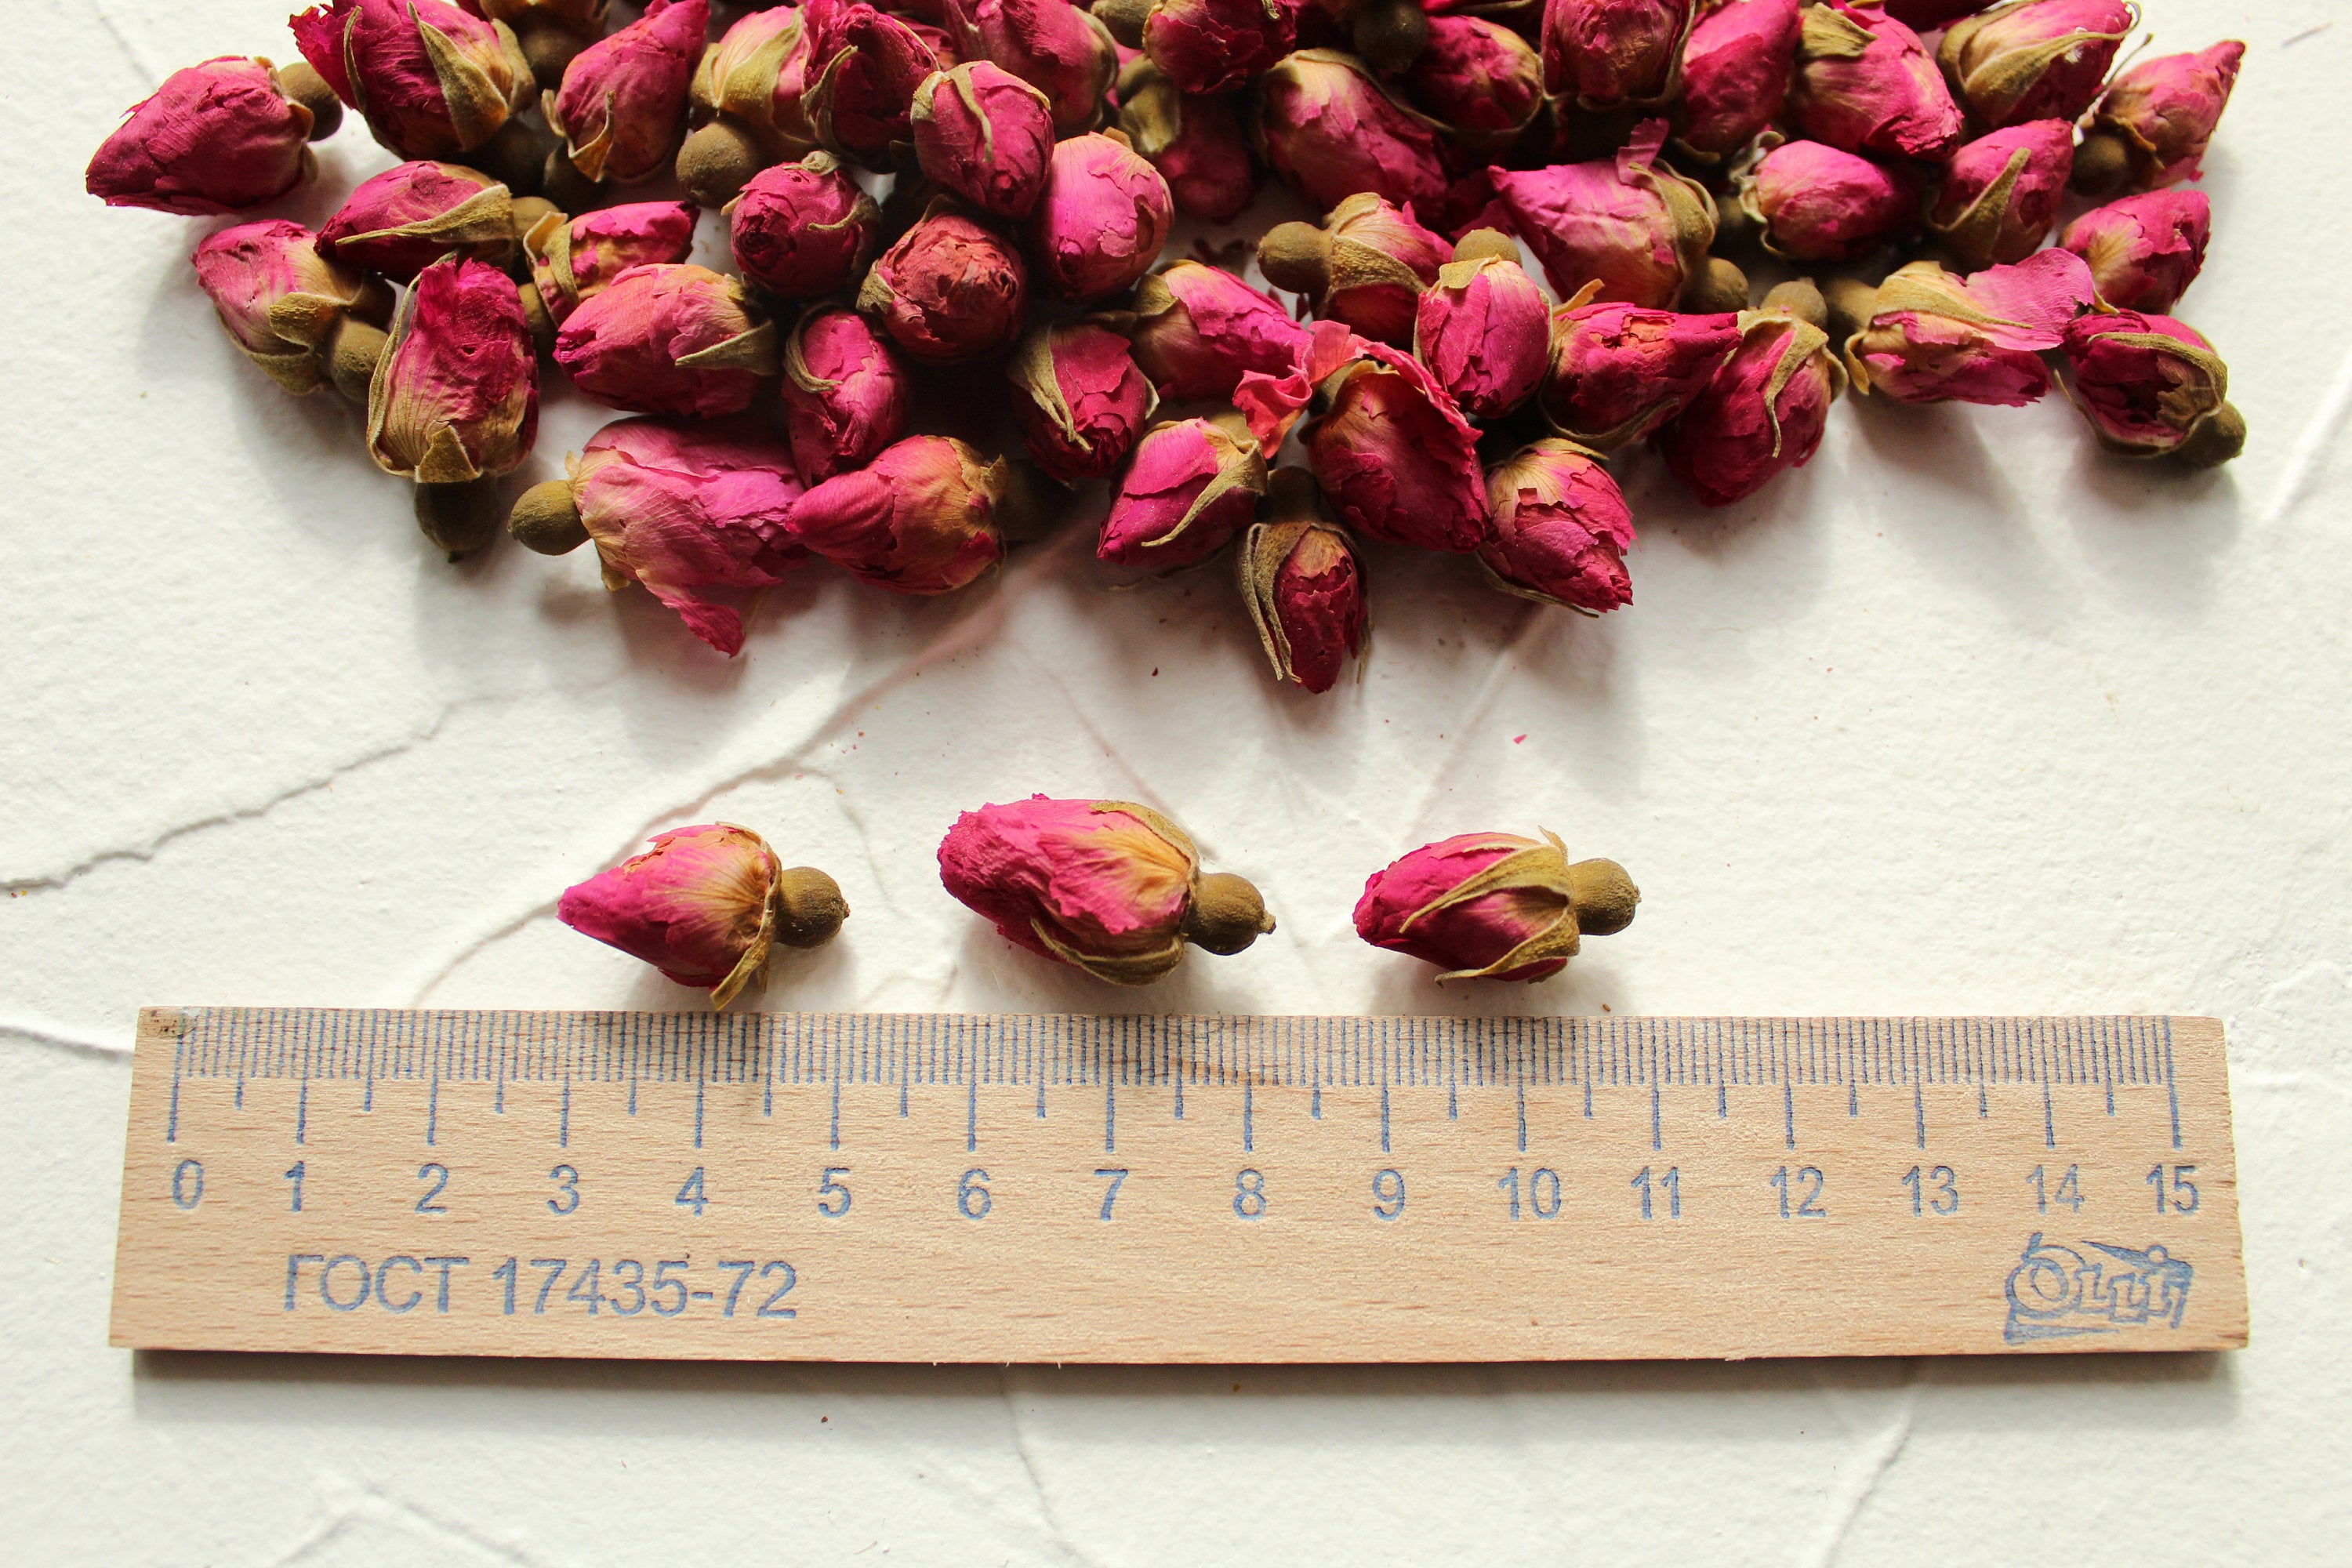 1/2 LB of Red rose buds, High Quality, Natural, Organic, Biodegraddable, Wedding, Craft, Edible, Confetti, Wedding toss, Wedding confetti